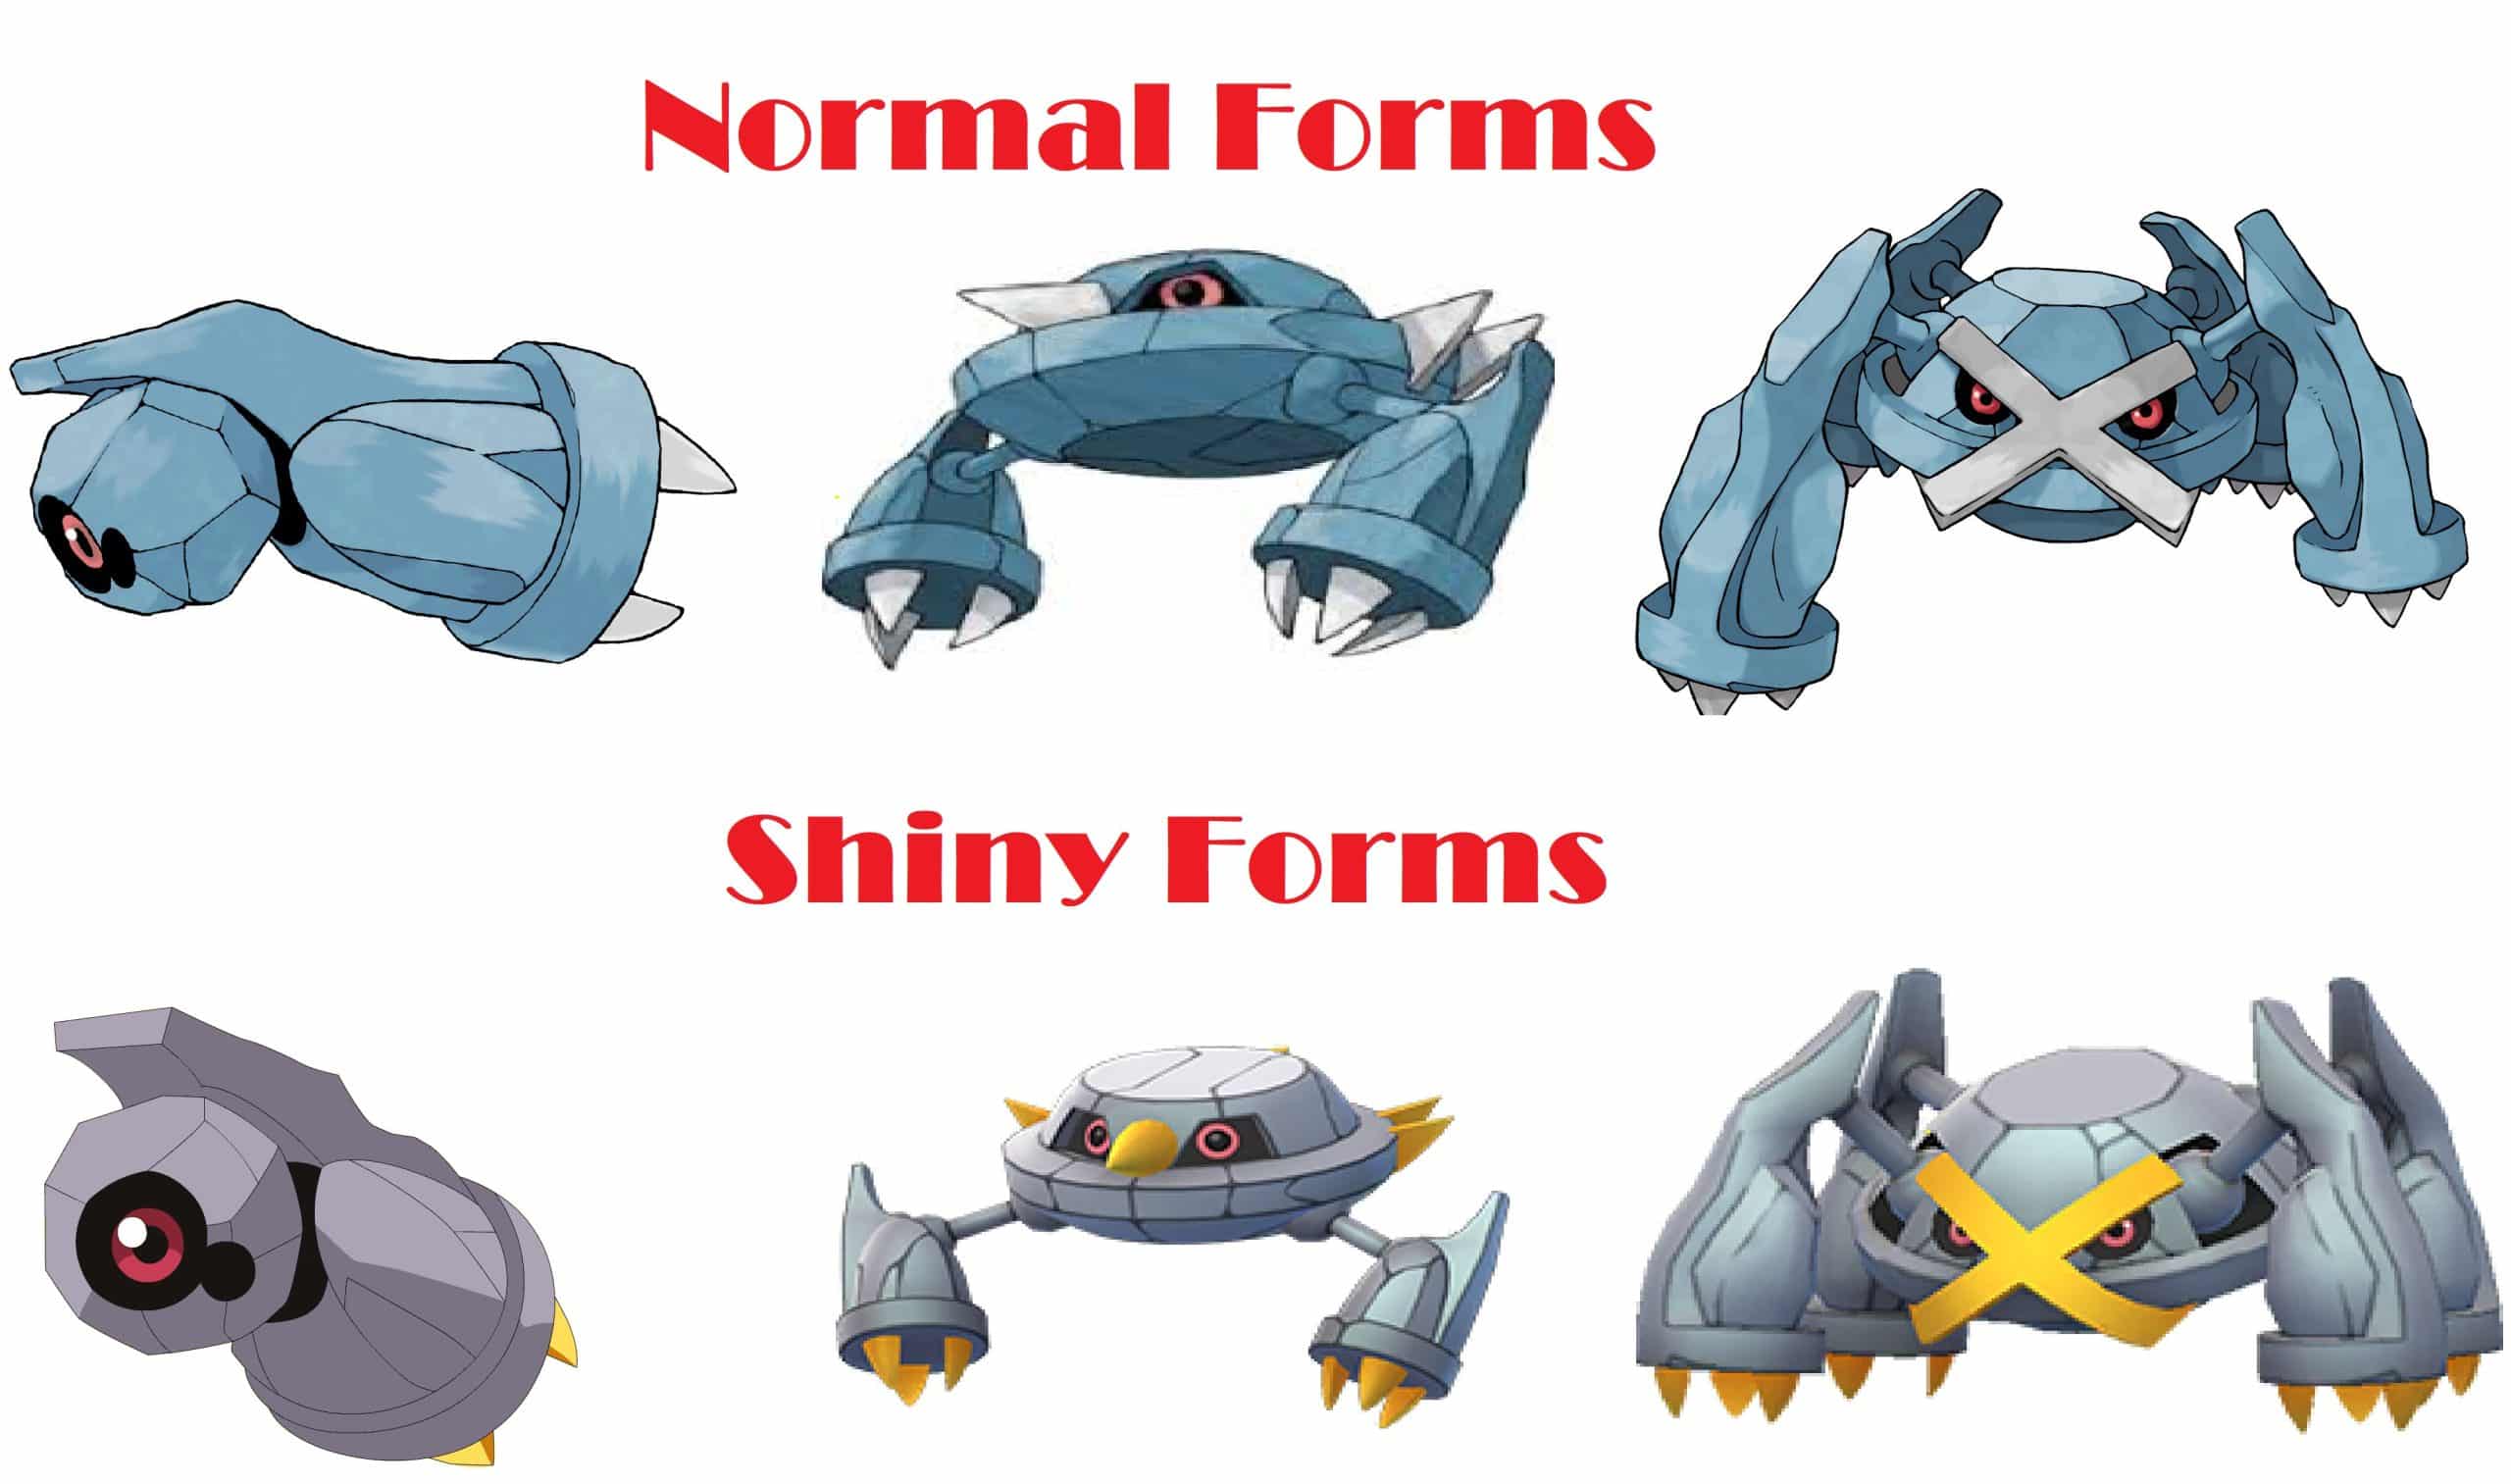 In addition, Niantic will release Beldum’s, Metang’s and Metagross' sh...